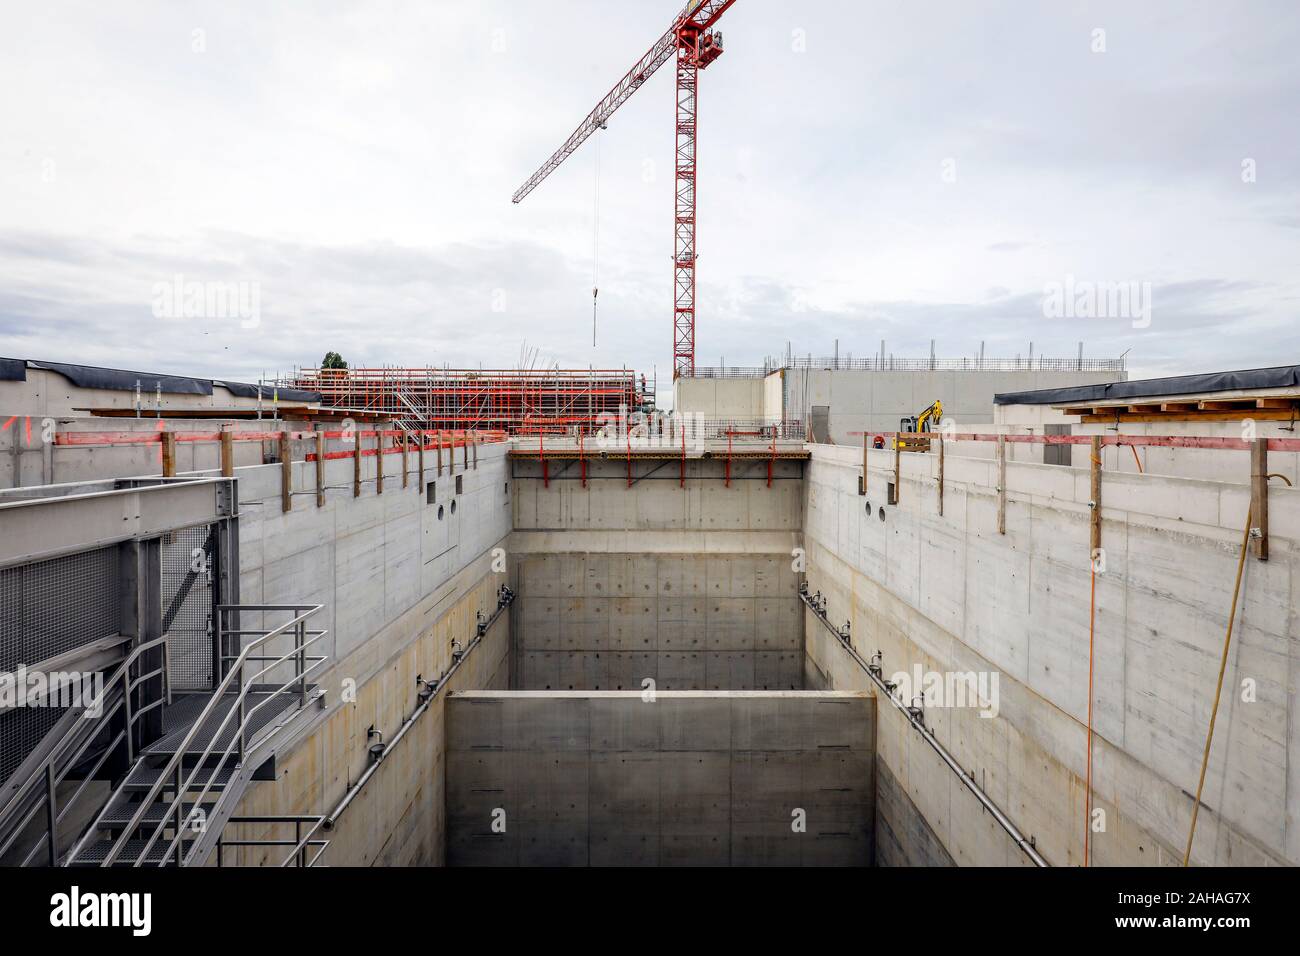 24.09.2019, Oberhausen, North Rhine-Westphalia, Germany - Emscher conversion, new construction of the Emscher AKE sewer, here construction site of the Stock Photo